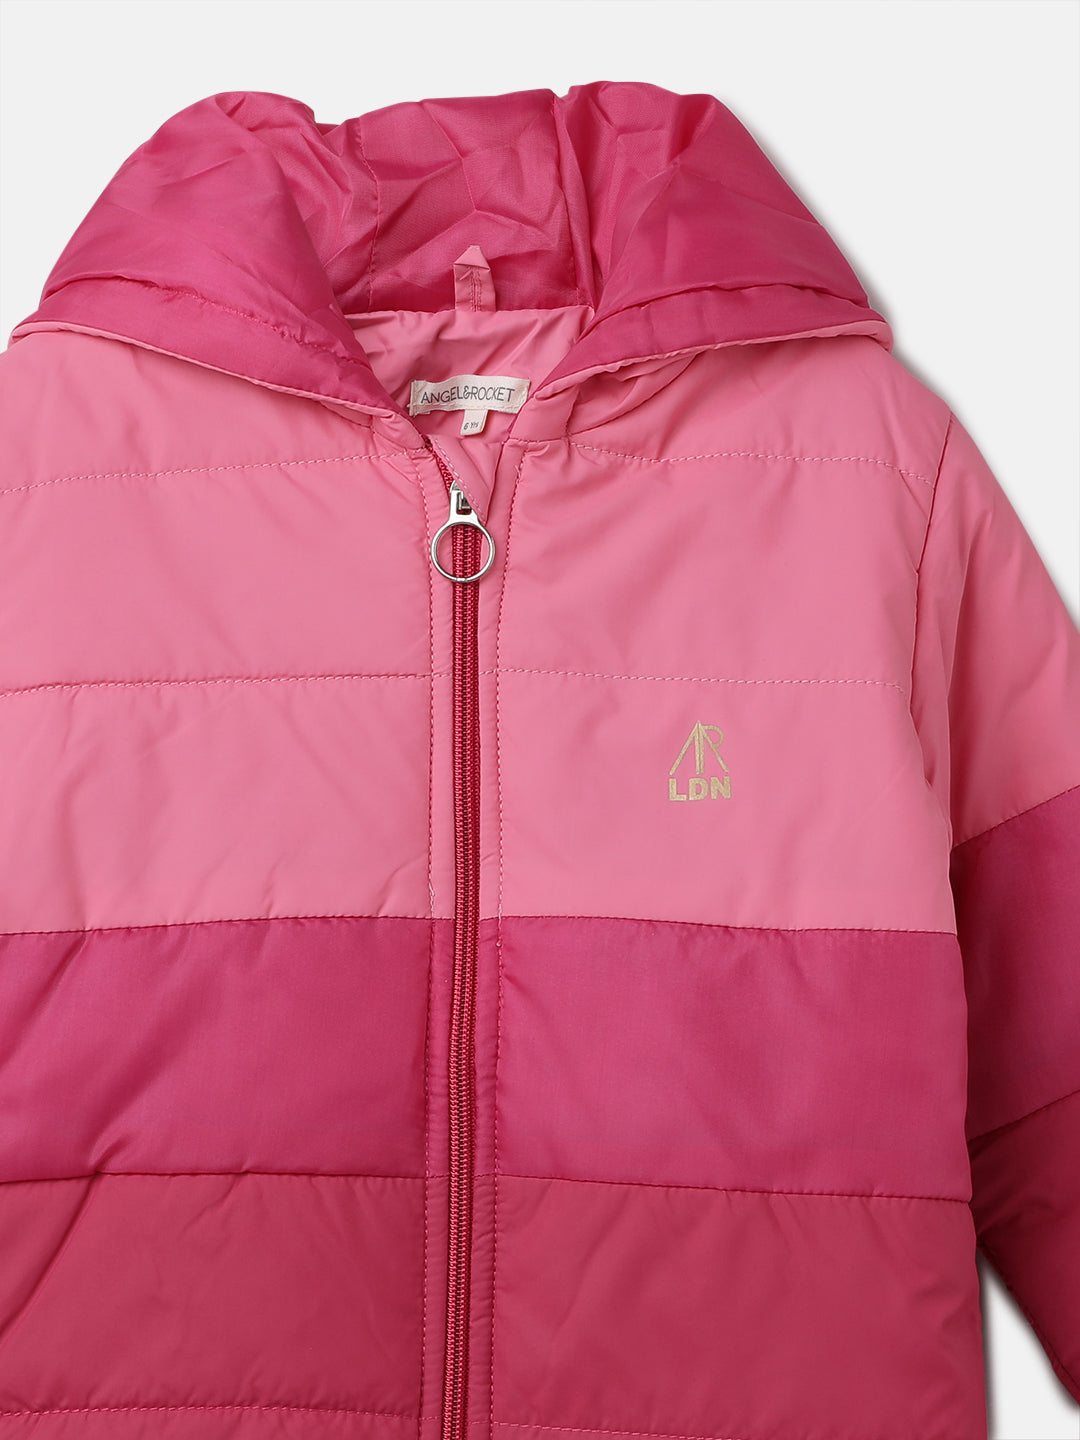 Girls Colour Blocked Puffa Jacket Pink with Hood